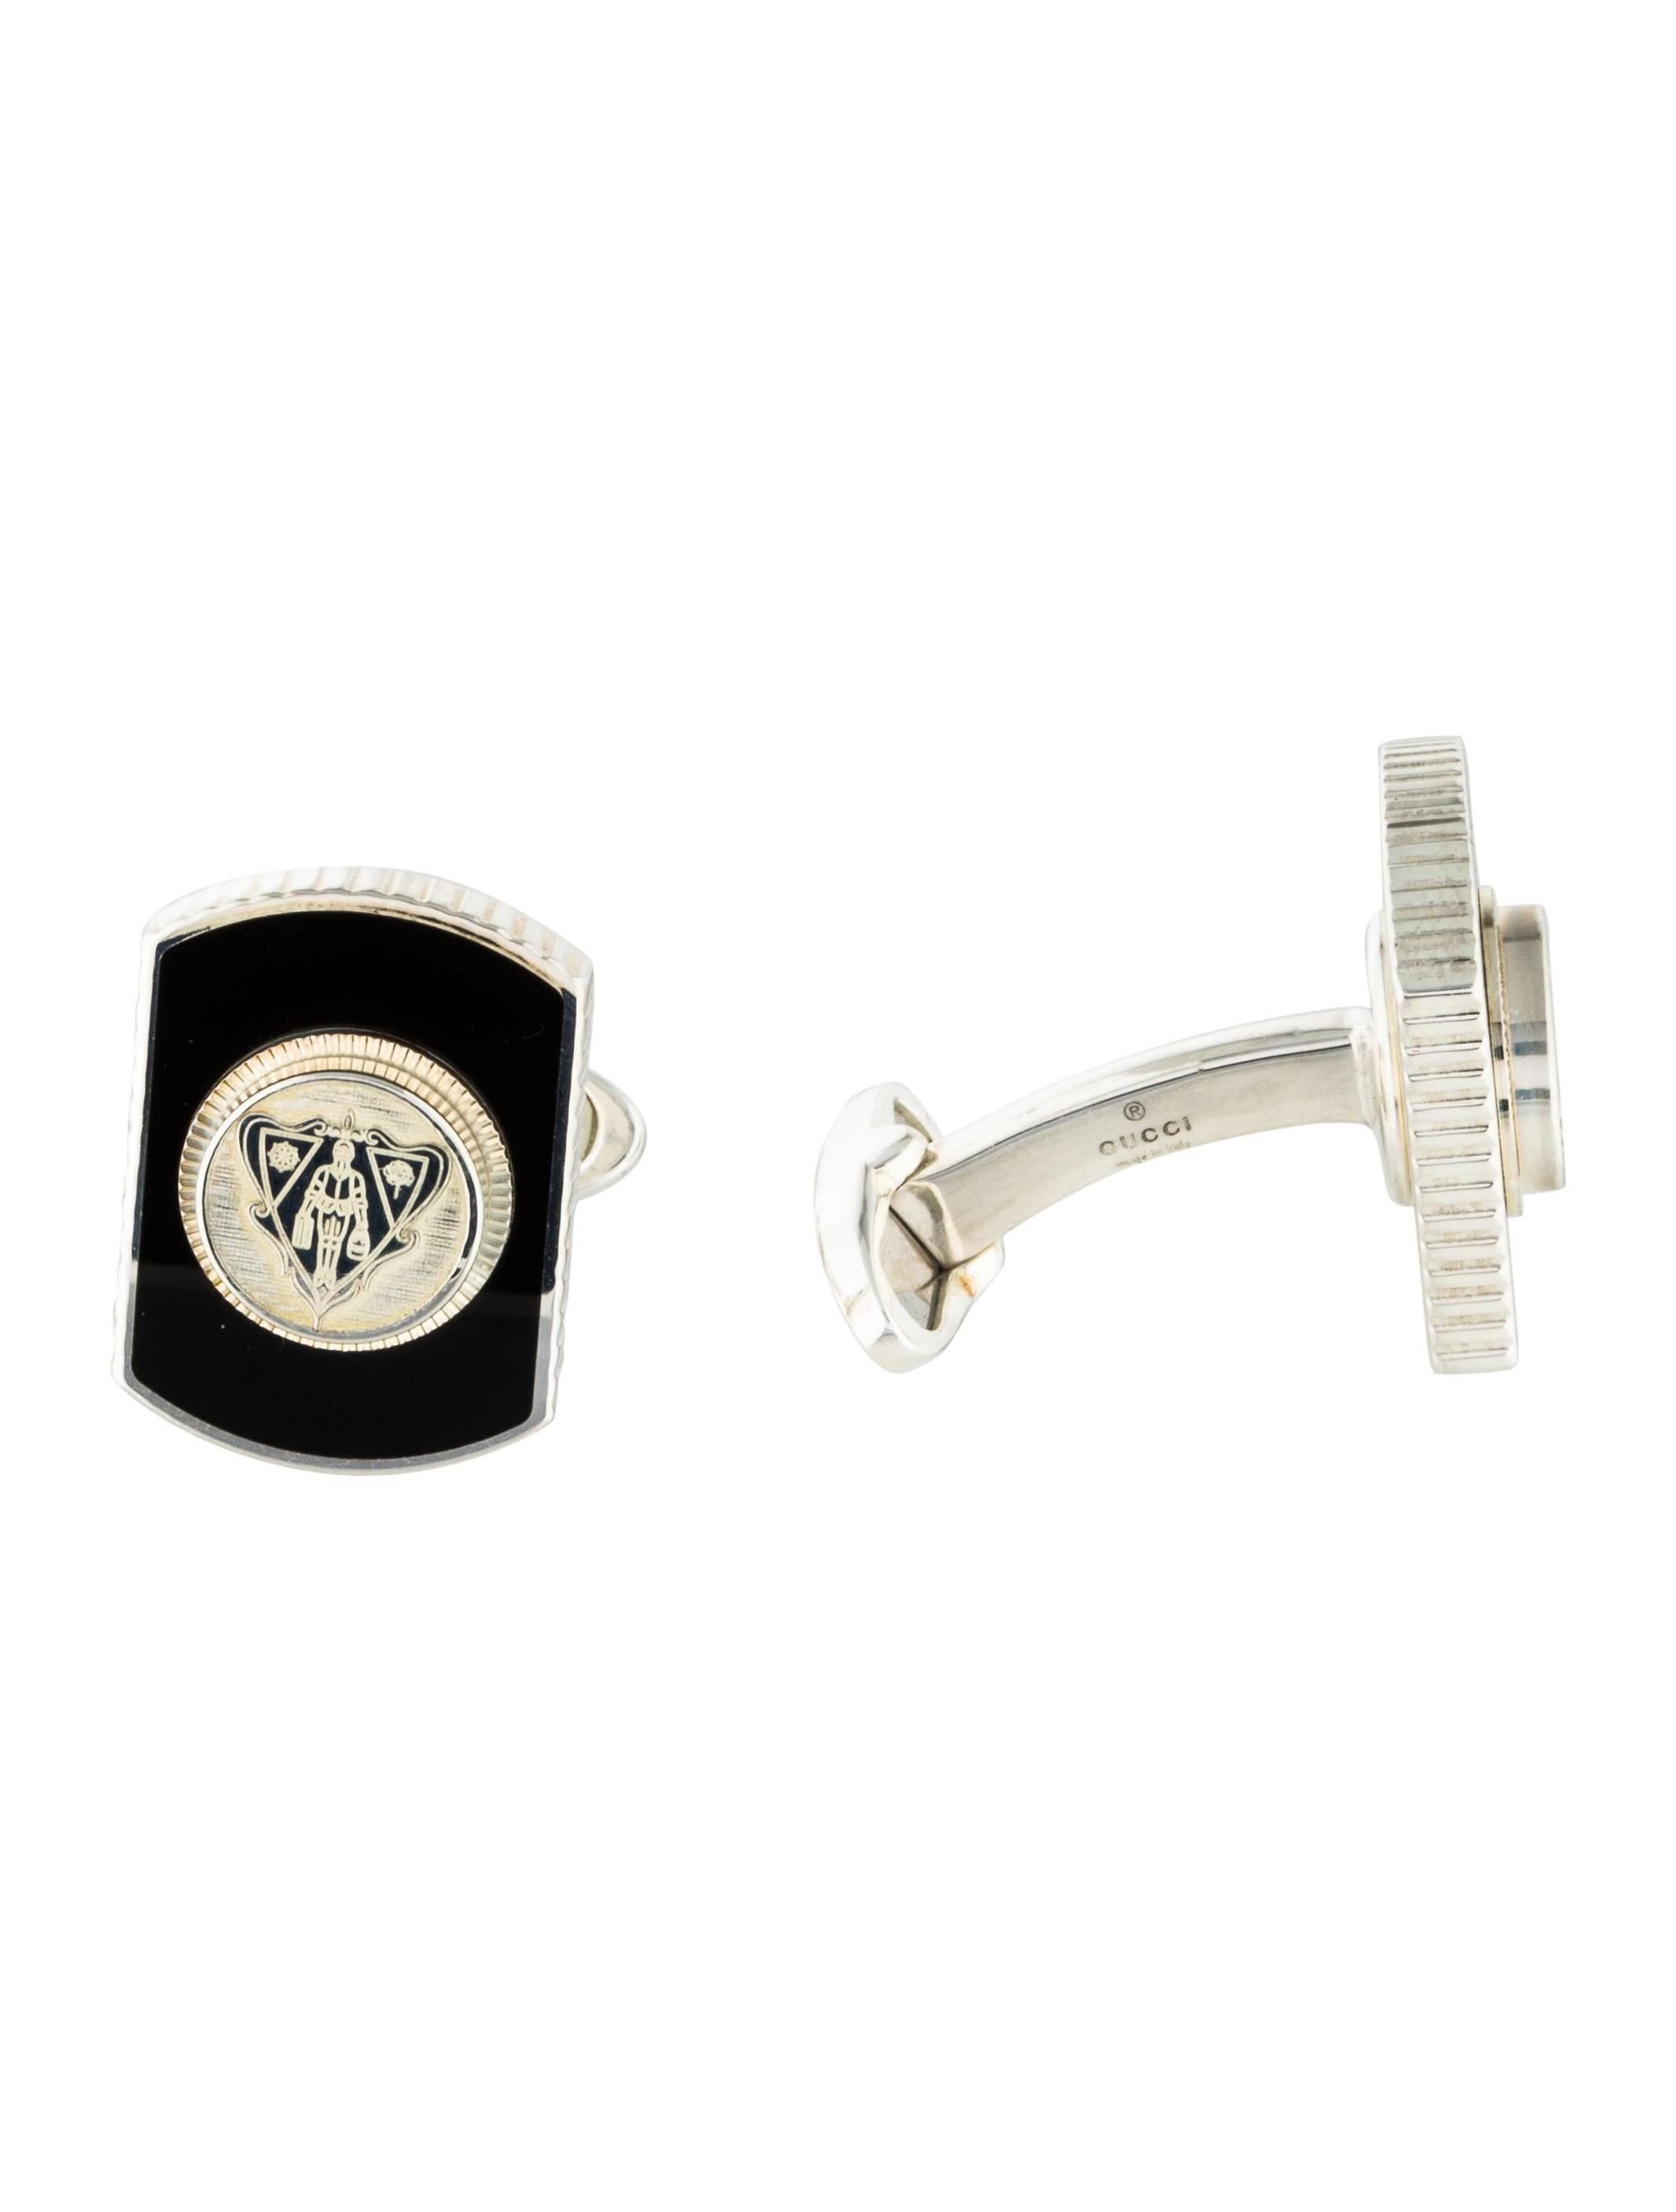 Gucci New Sterling Silver Black Hysteria Evening Suit Accessory Cuff Links in Box

Genuine sterling silver - 925 
Whale back closure
Signed 
Made in Italy
Measures 0.75" W x 0.50" L
Includes original Gucci authentic card, storage pouch and